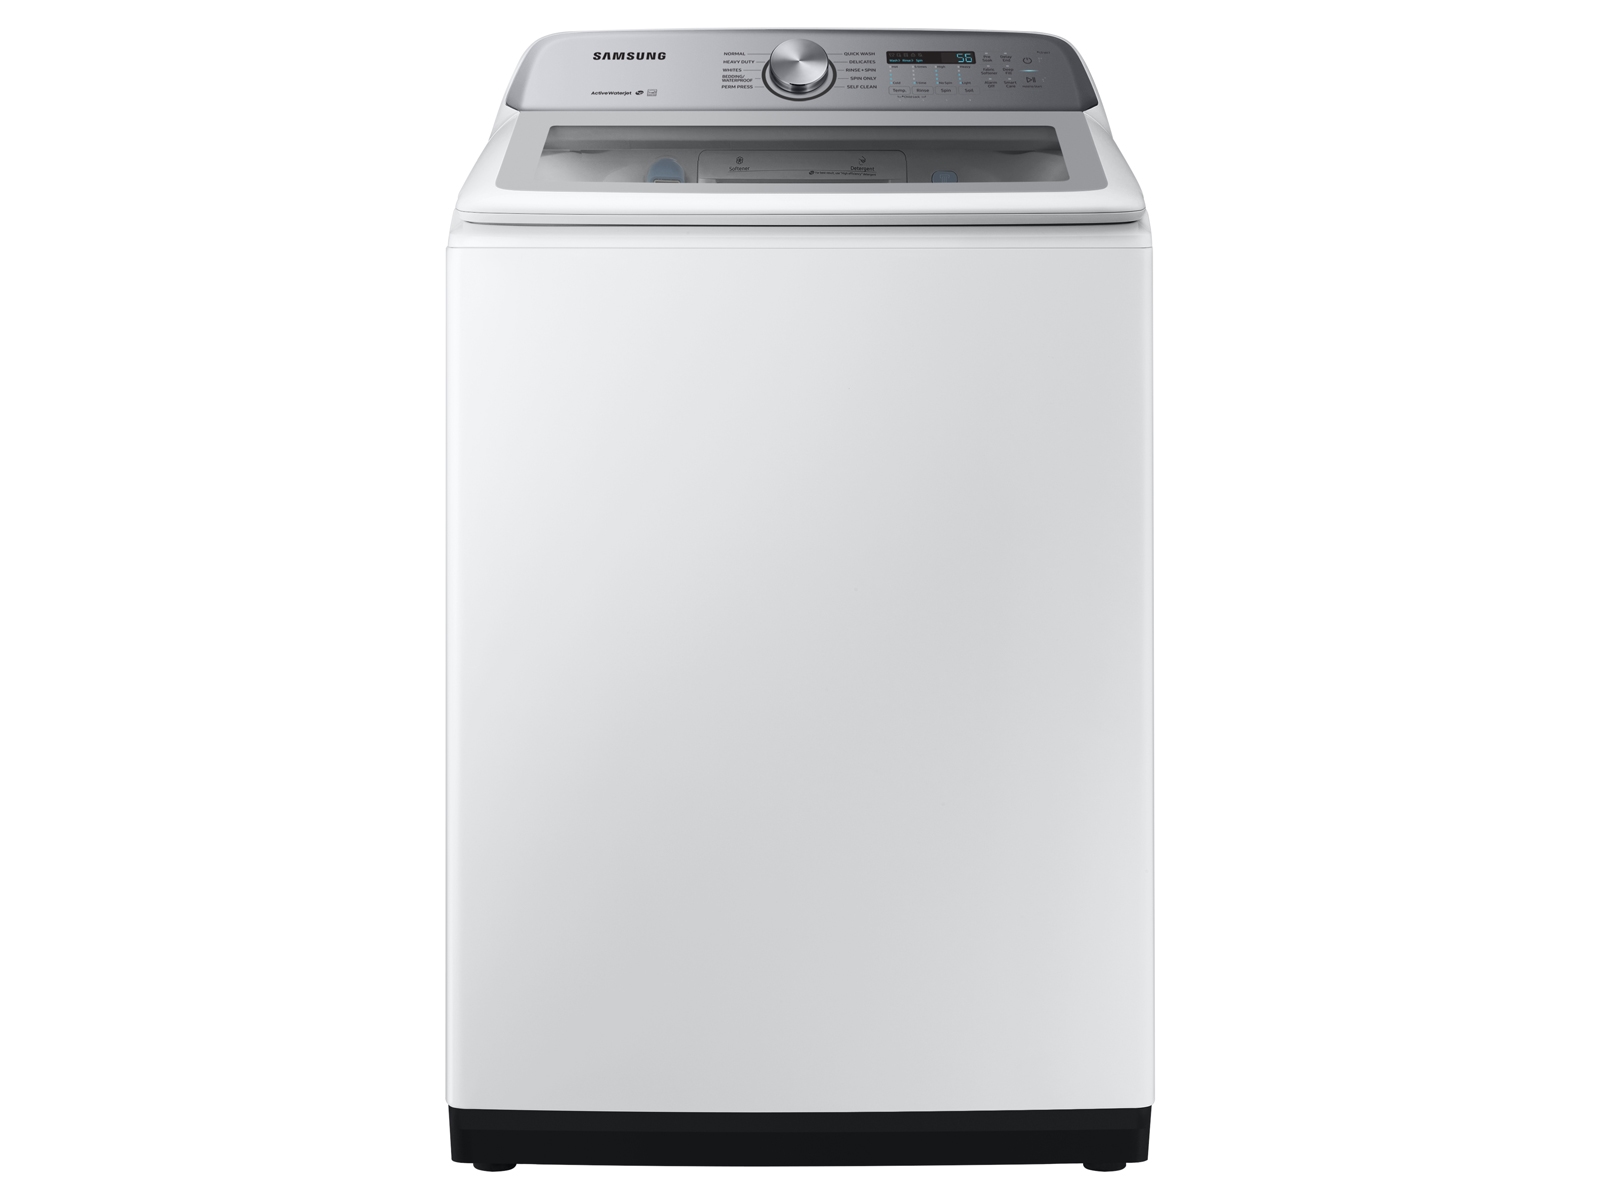 Samsung 5.0 cu. ft. Top Load Washer with Active WaterJet in White(WA50R5200AW/US)